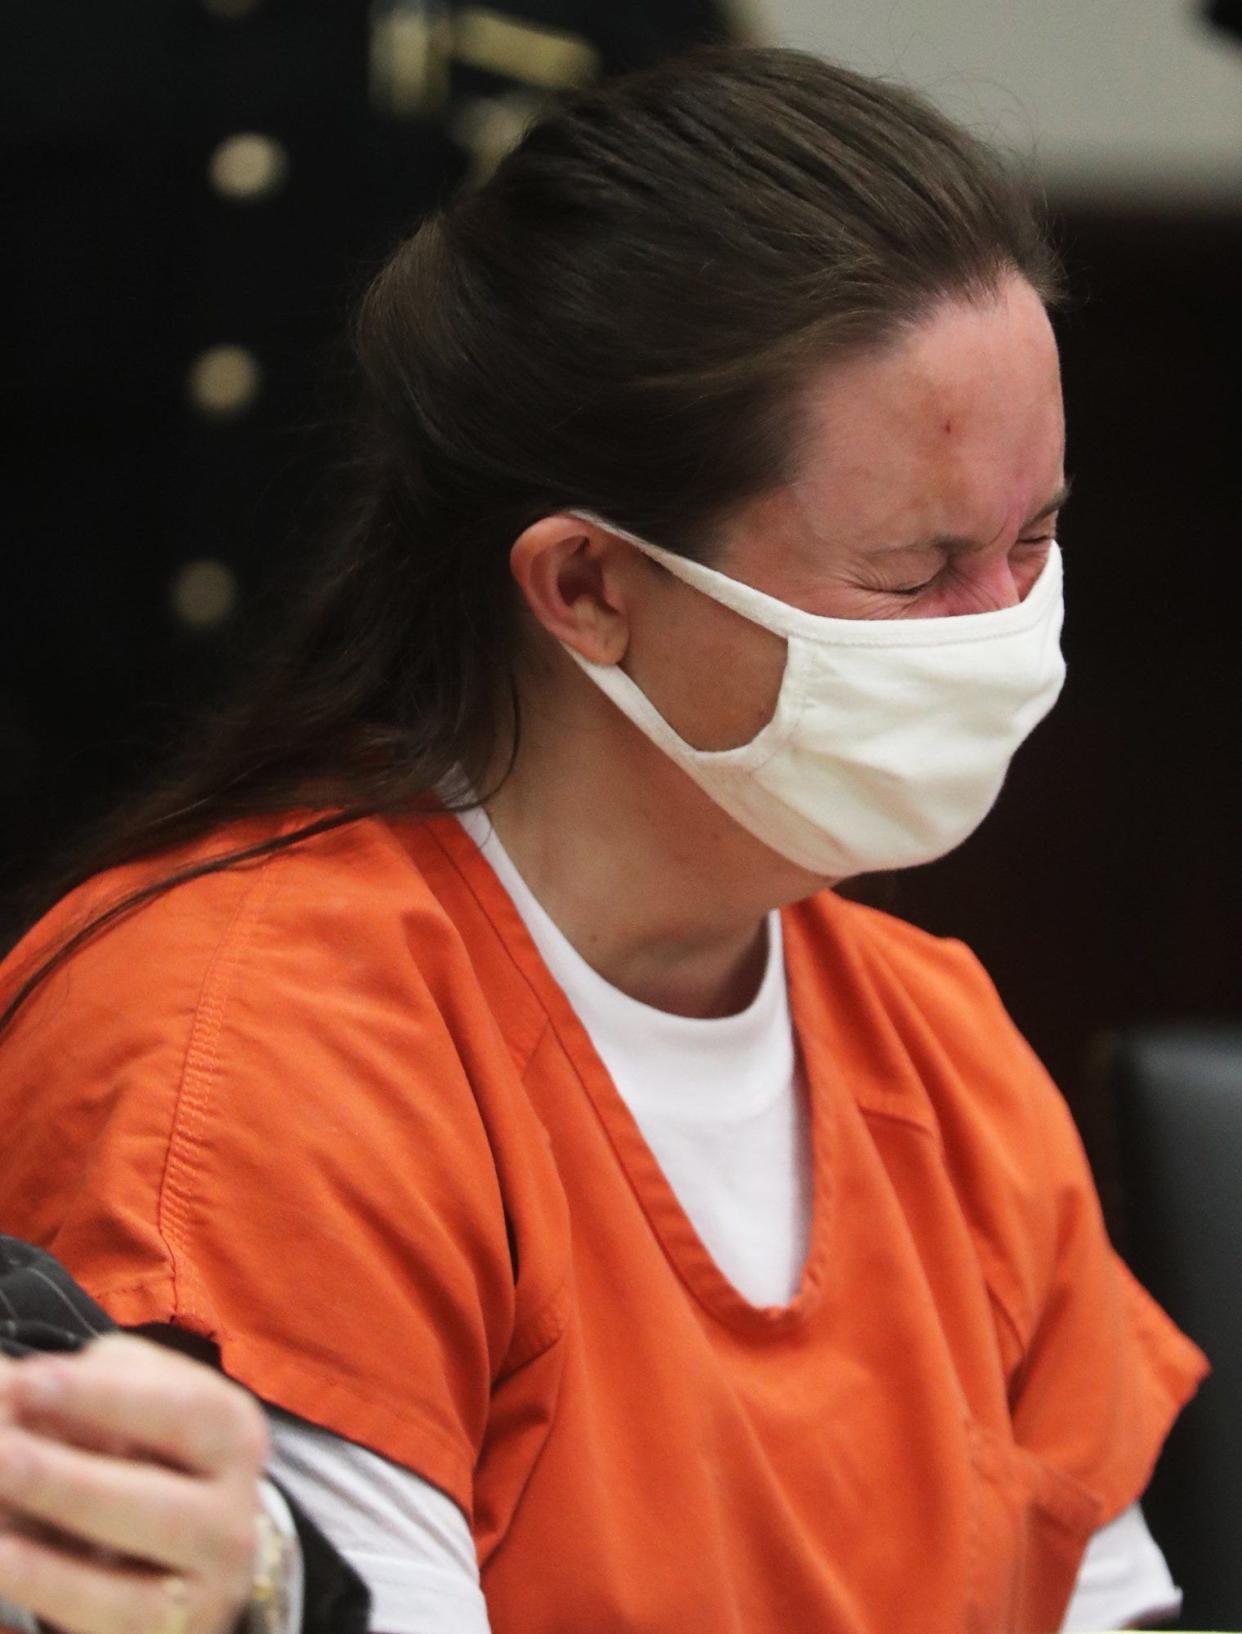 Erica Stefanko breaks down as she listens to family members speak during her sentencing in July 2021. Stefanko was sentenced to life in prison with possible parole after 30 years but then won the right to a new trial.